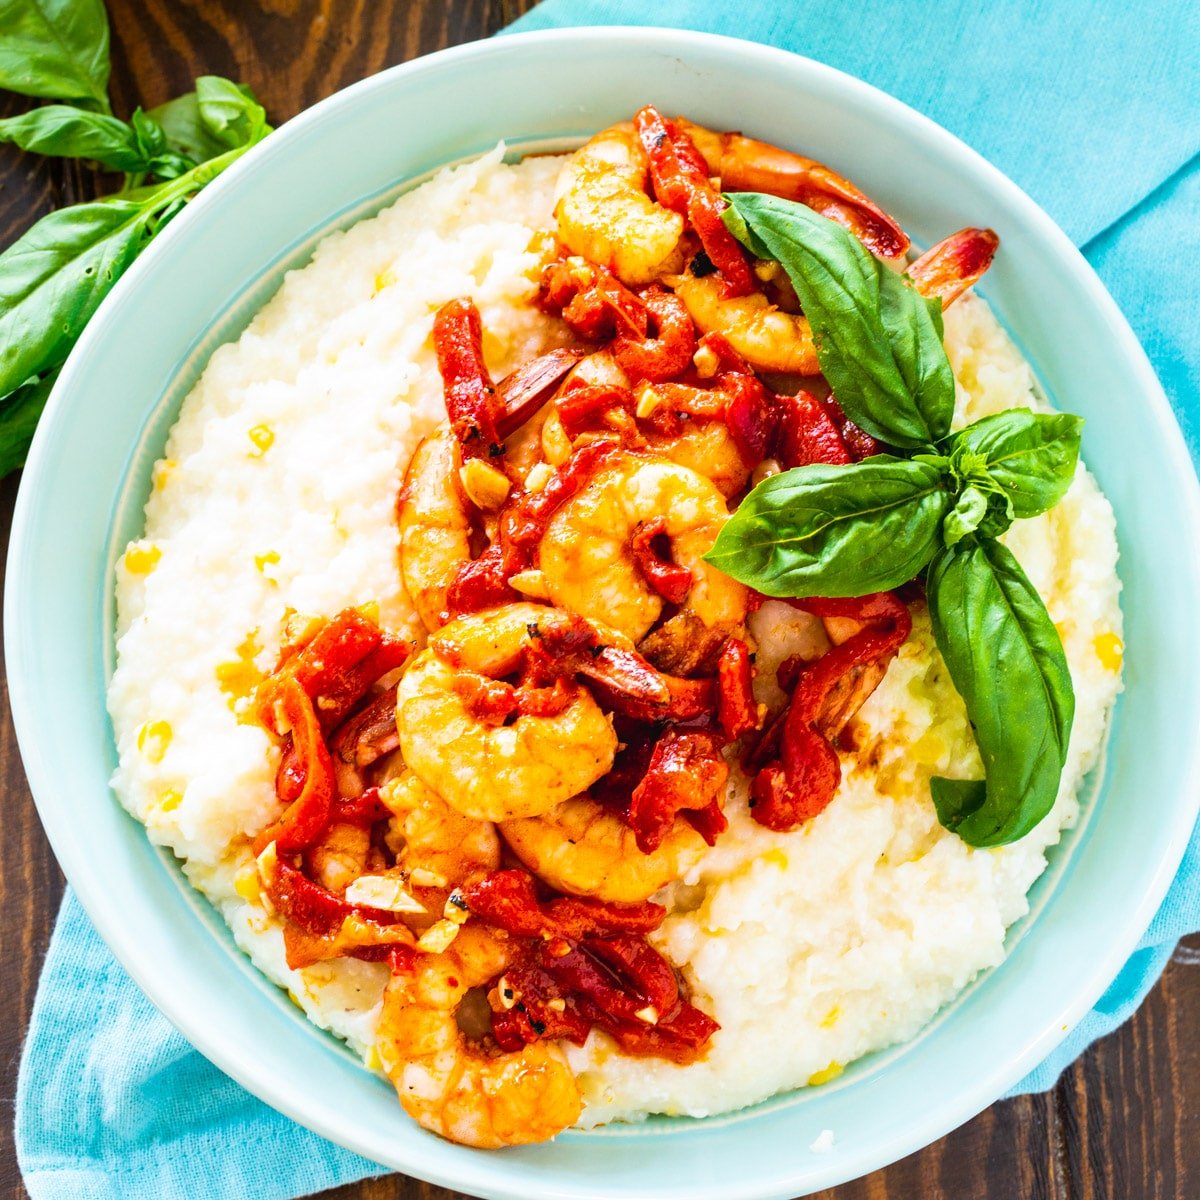 Shrimp and Goat Cheese Grits with Roasted Red Pepper Sauce in a blue bowl with basil.